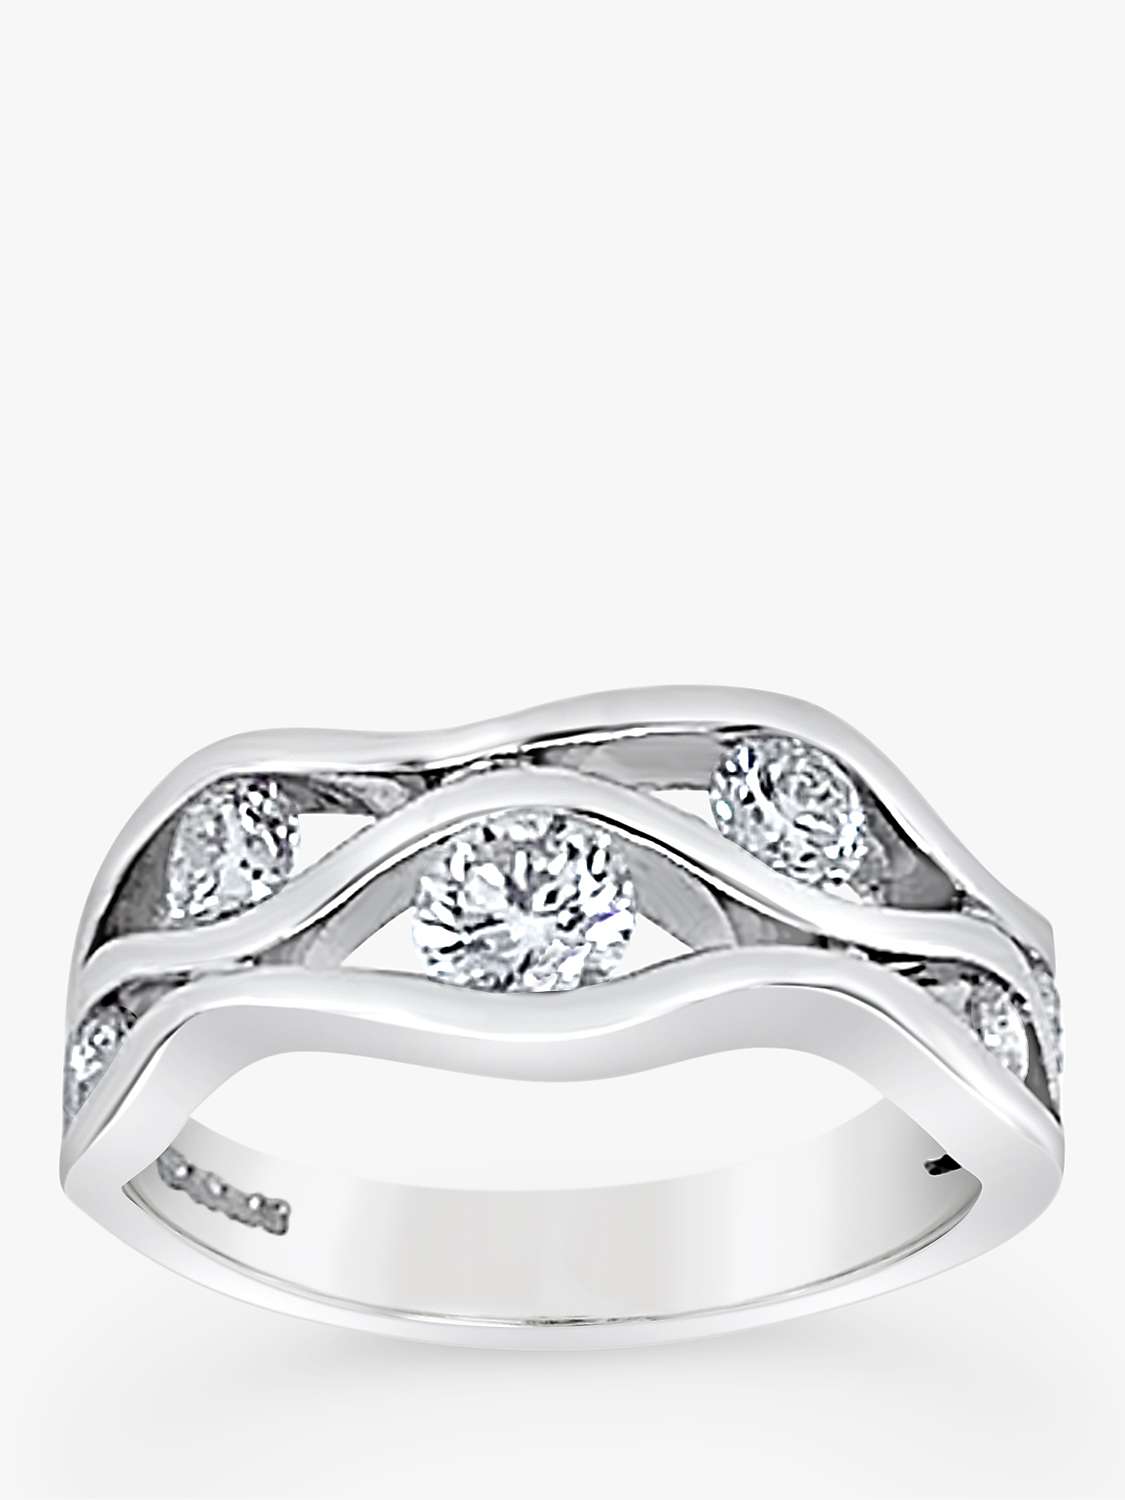 Buy Milton & Humble Jewellery 18ct White Gold Second Hand Diamond Wave Band Ring Online at johnlewis.com